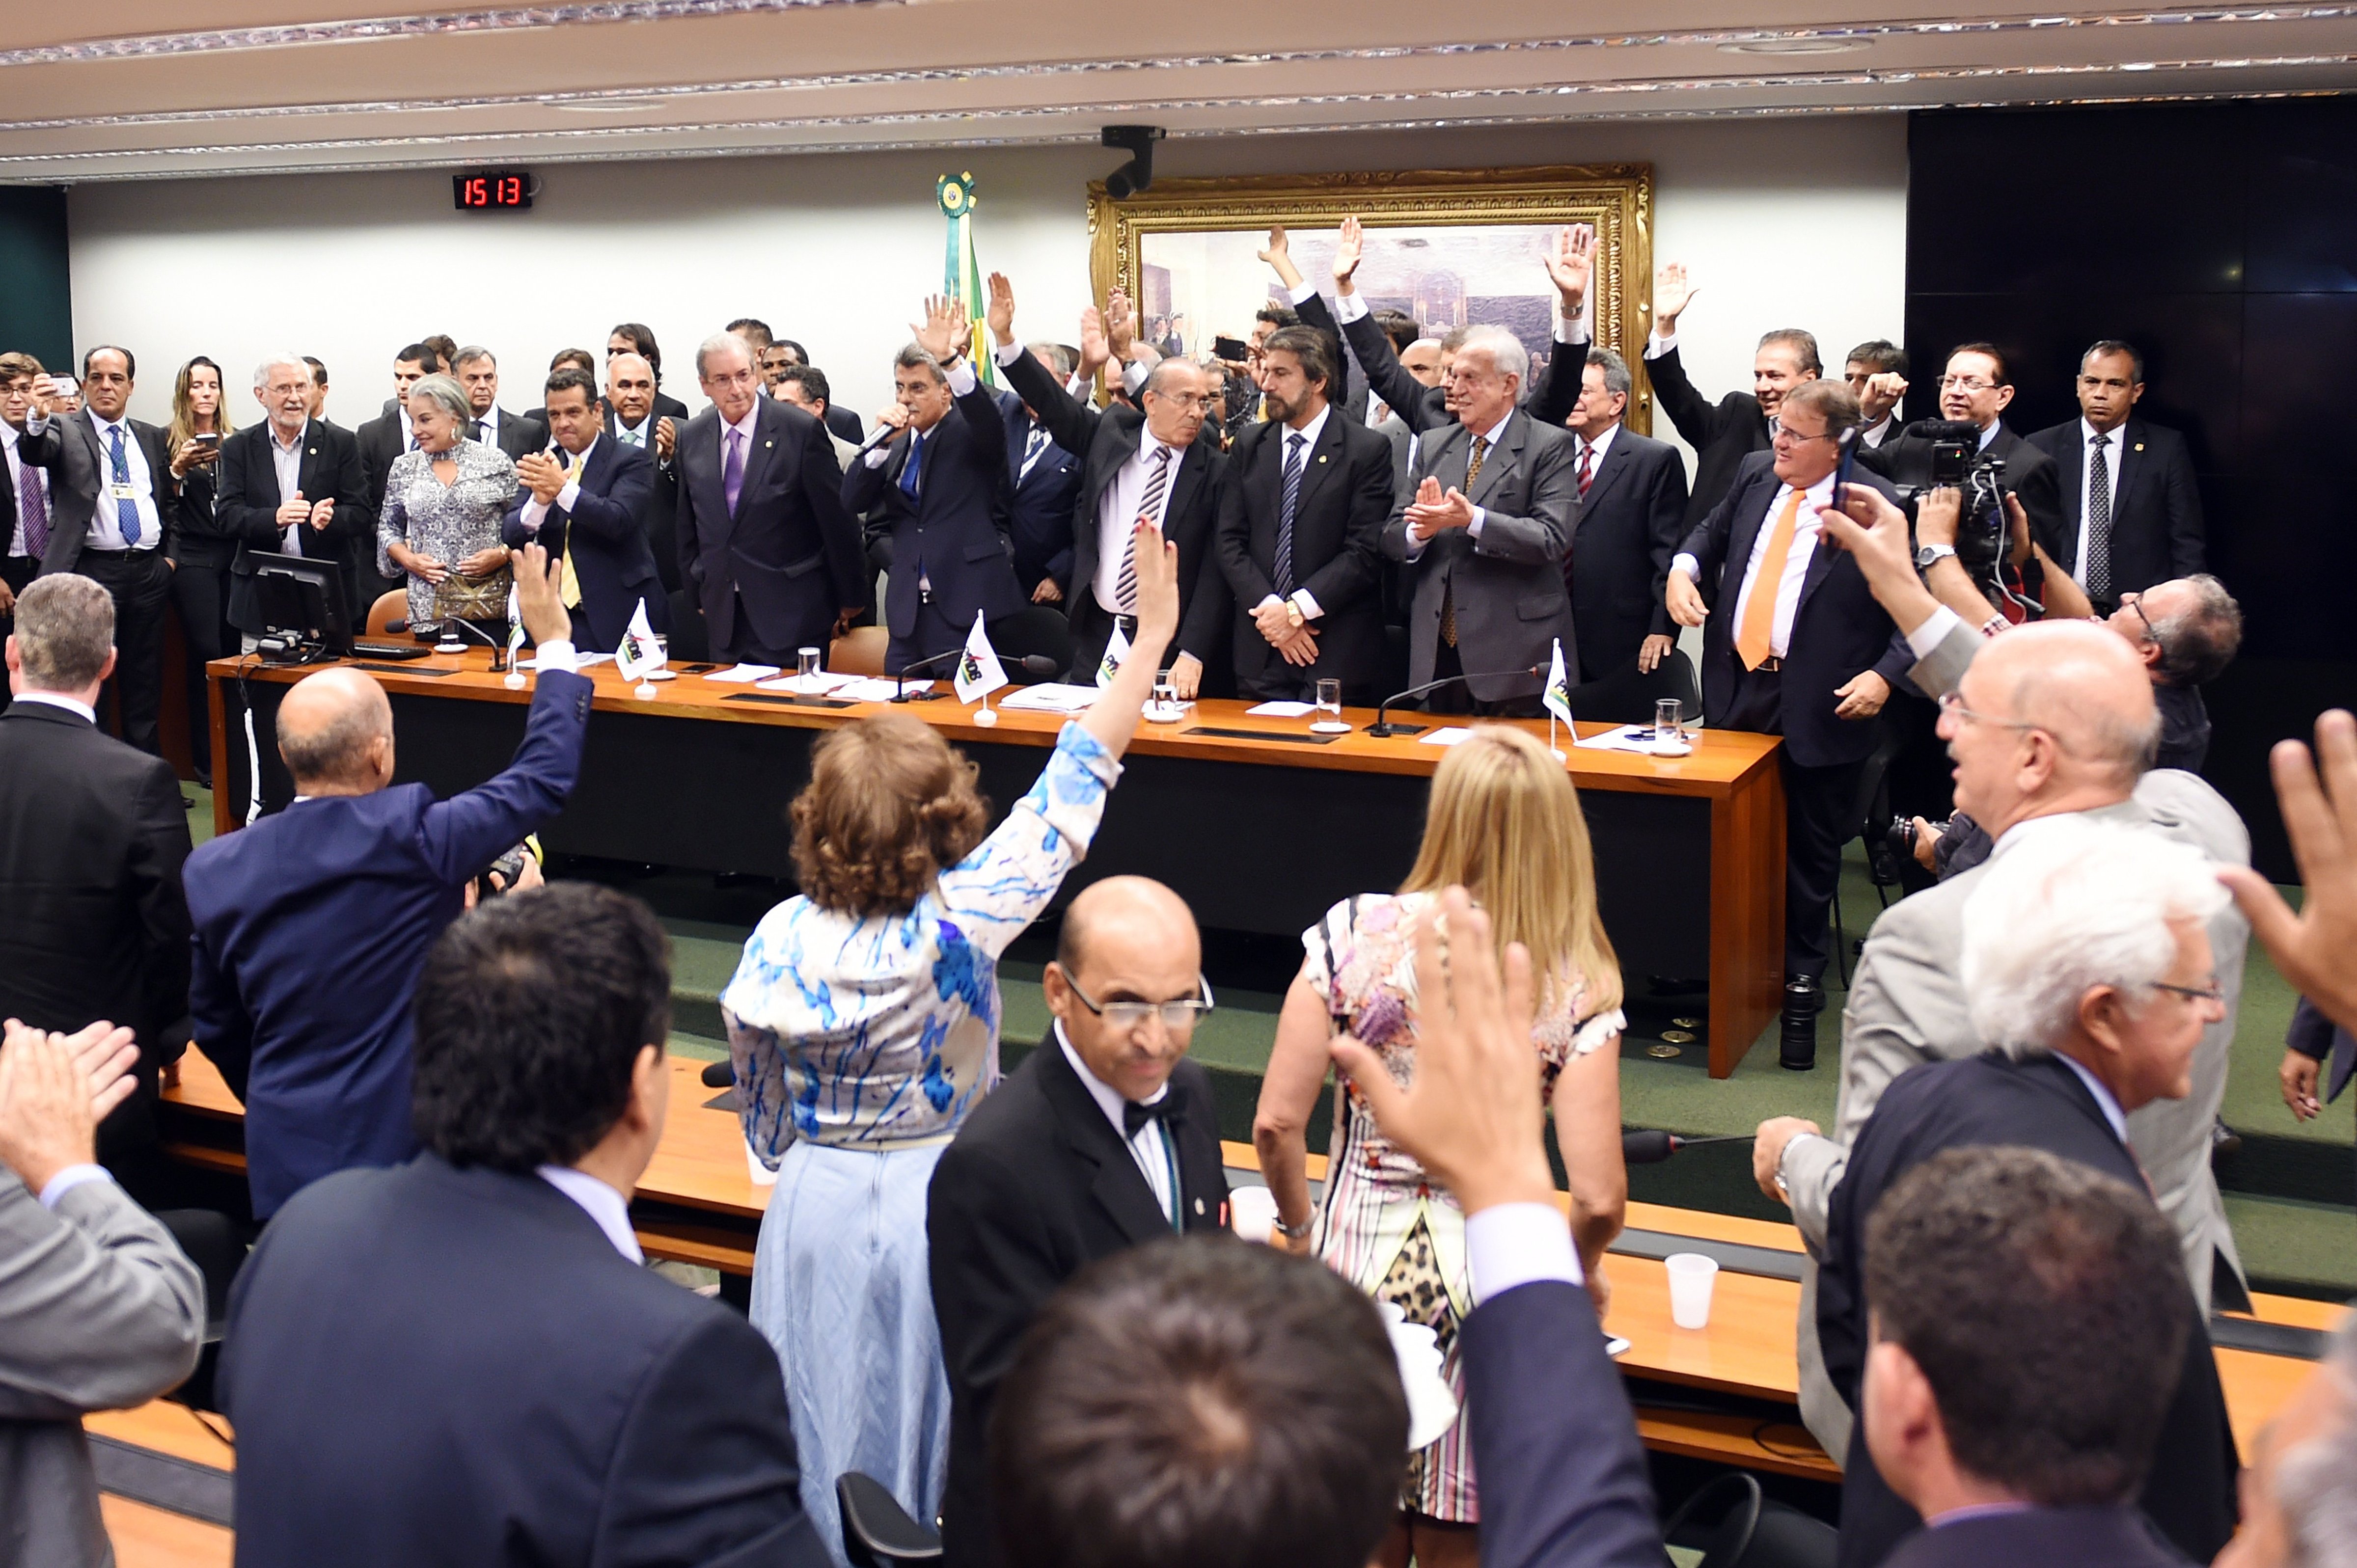 Brazil's PMDB party lawmakers unanimously vote for leaving the government coalition, at the PMDB's headquarters in Brasilia, on March 29, 2016. (EVARISTO SA—AFP/Getty Images)